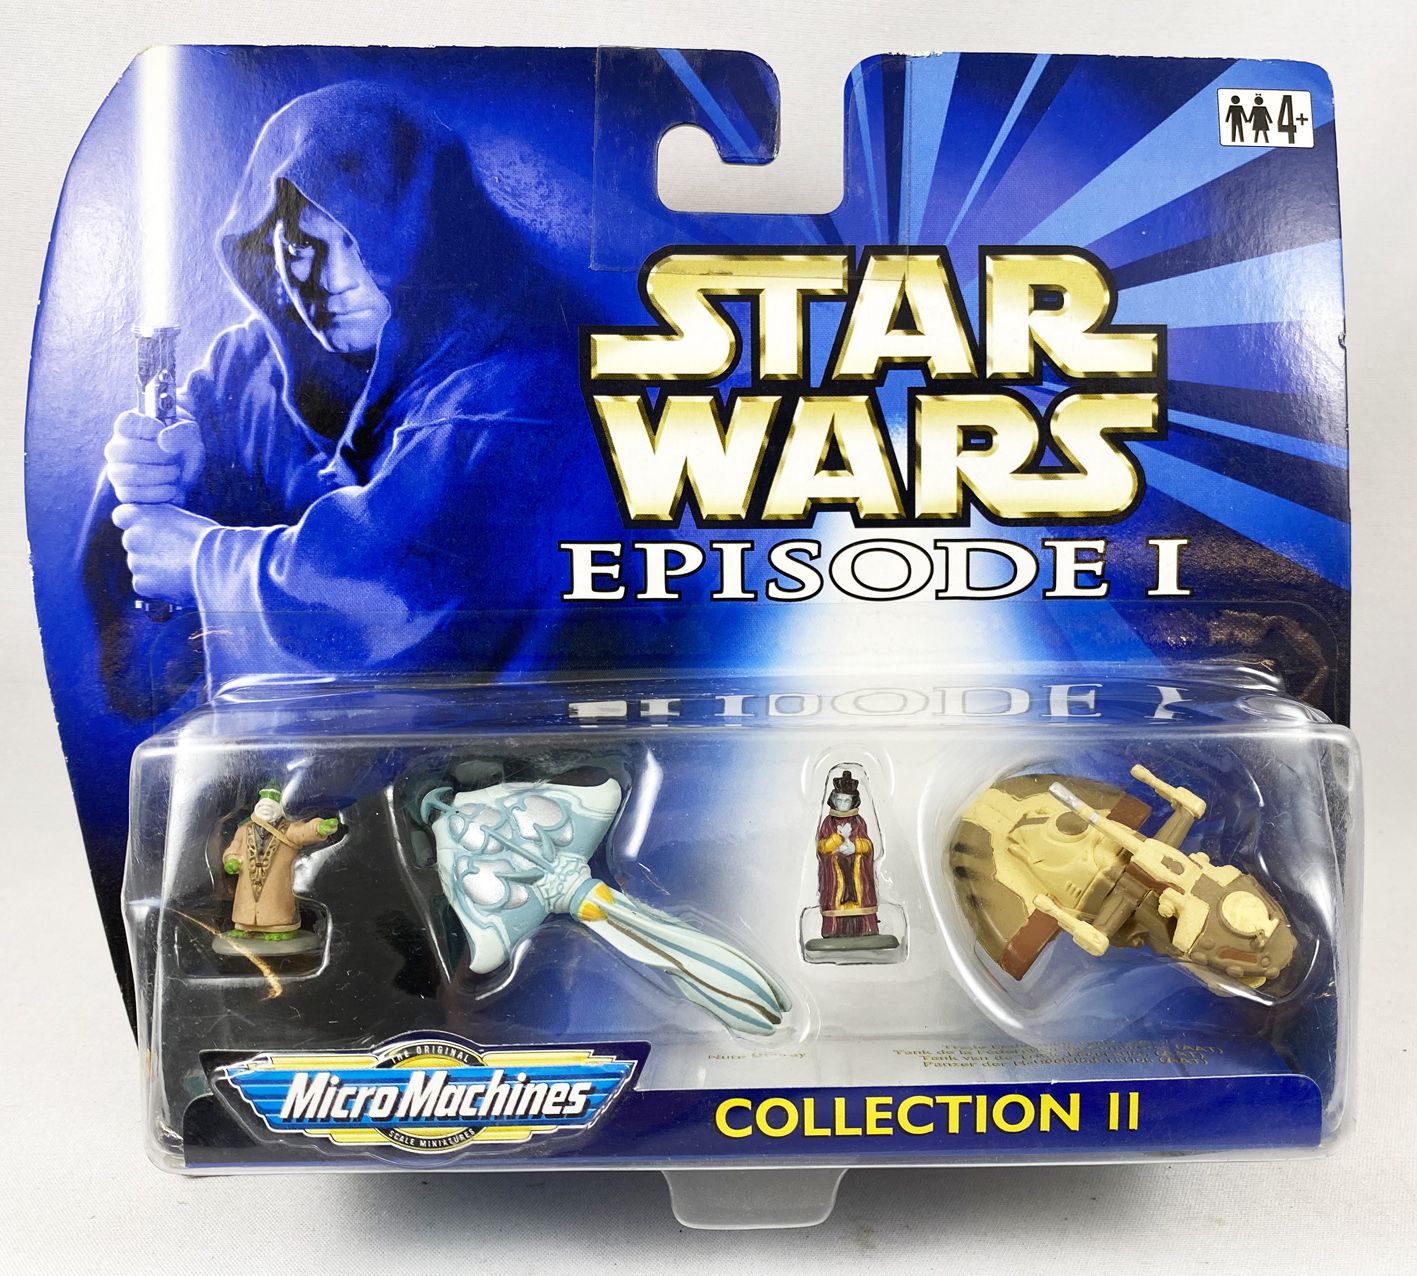 Details about   Micro Machines Star Wars Episode 1 Collection II Galoob-1998 